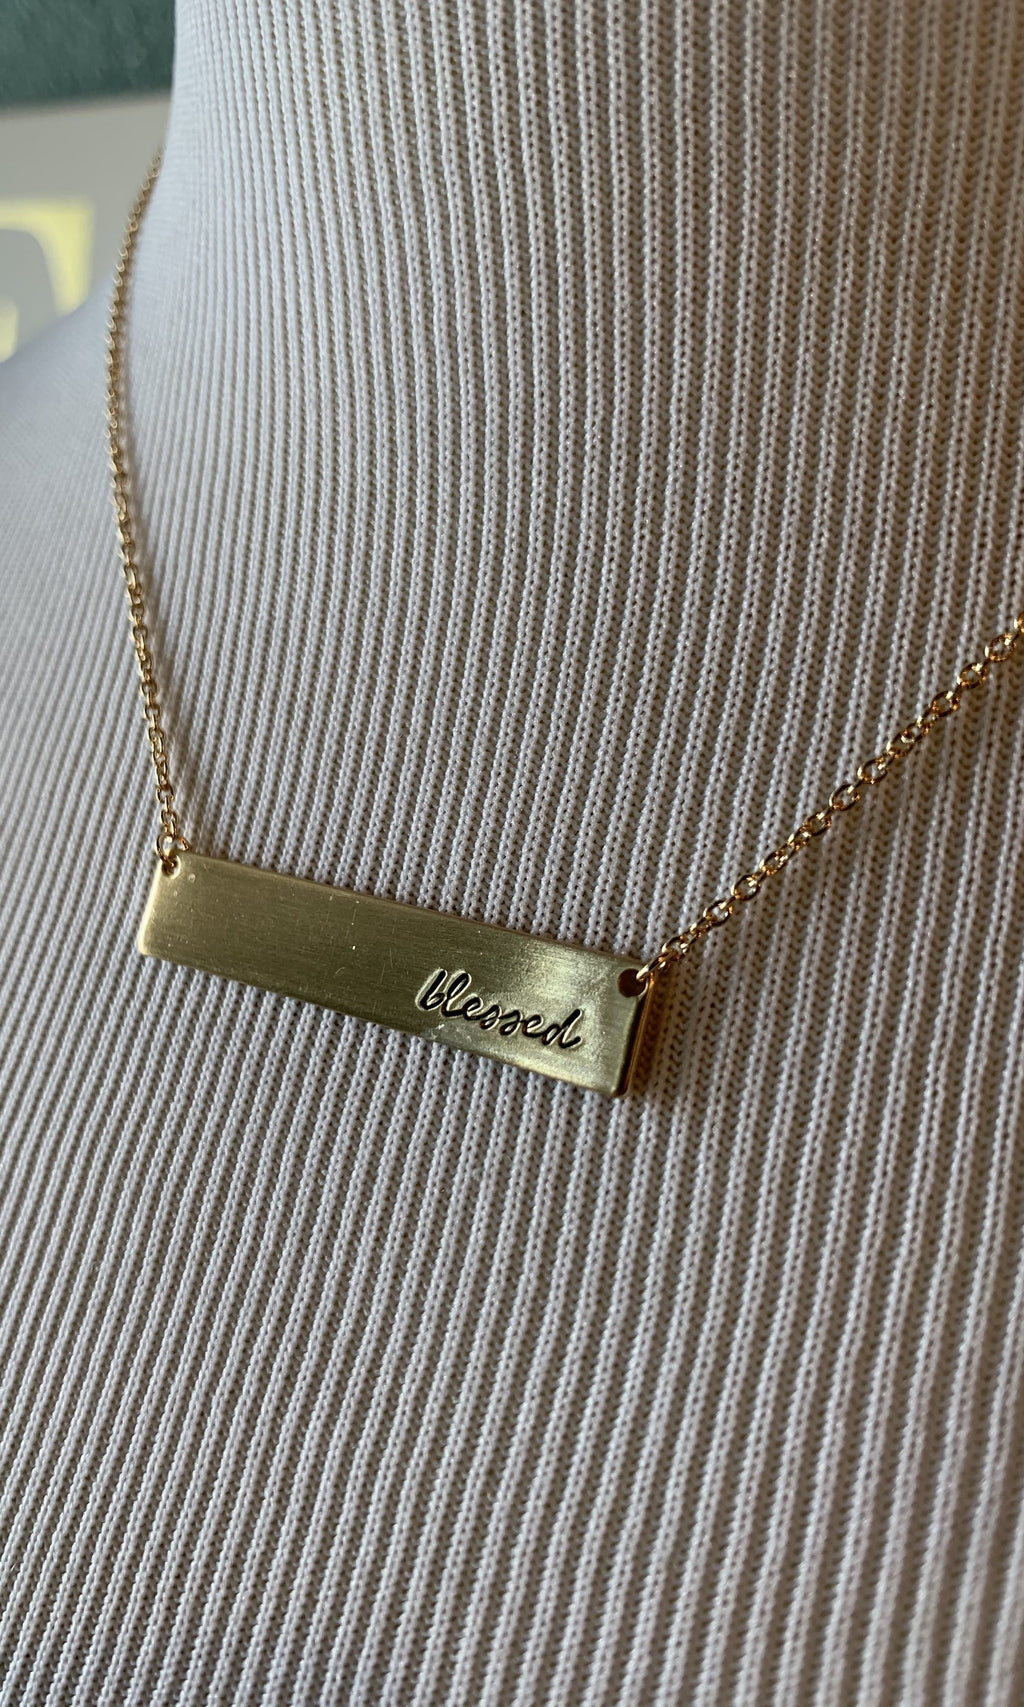 BLESSED Gold Bar Necklace